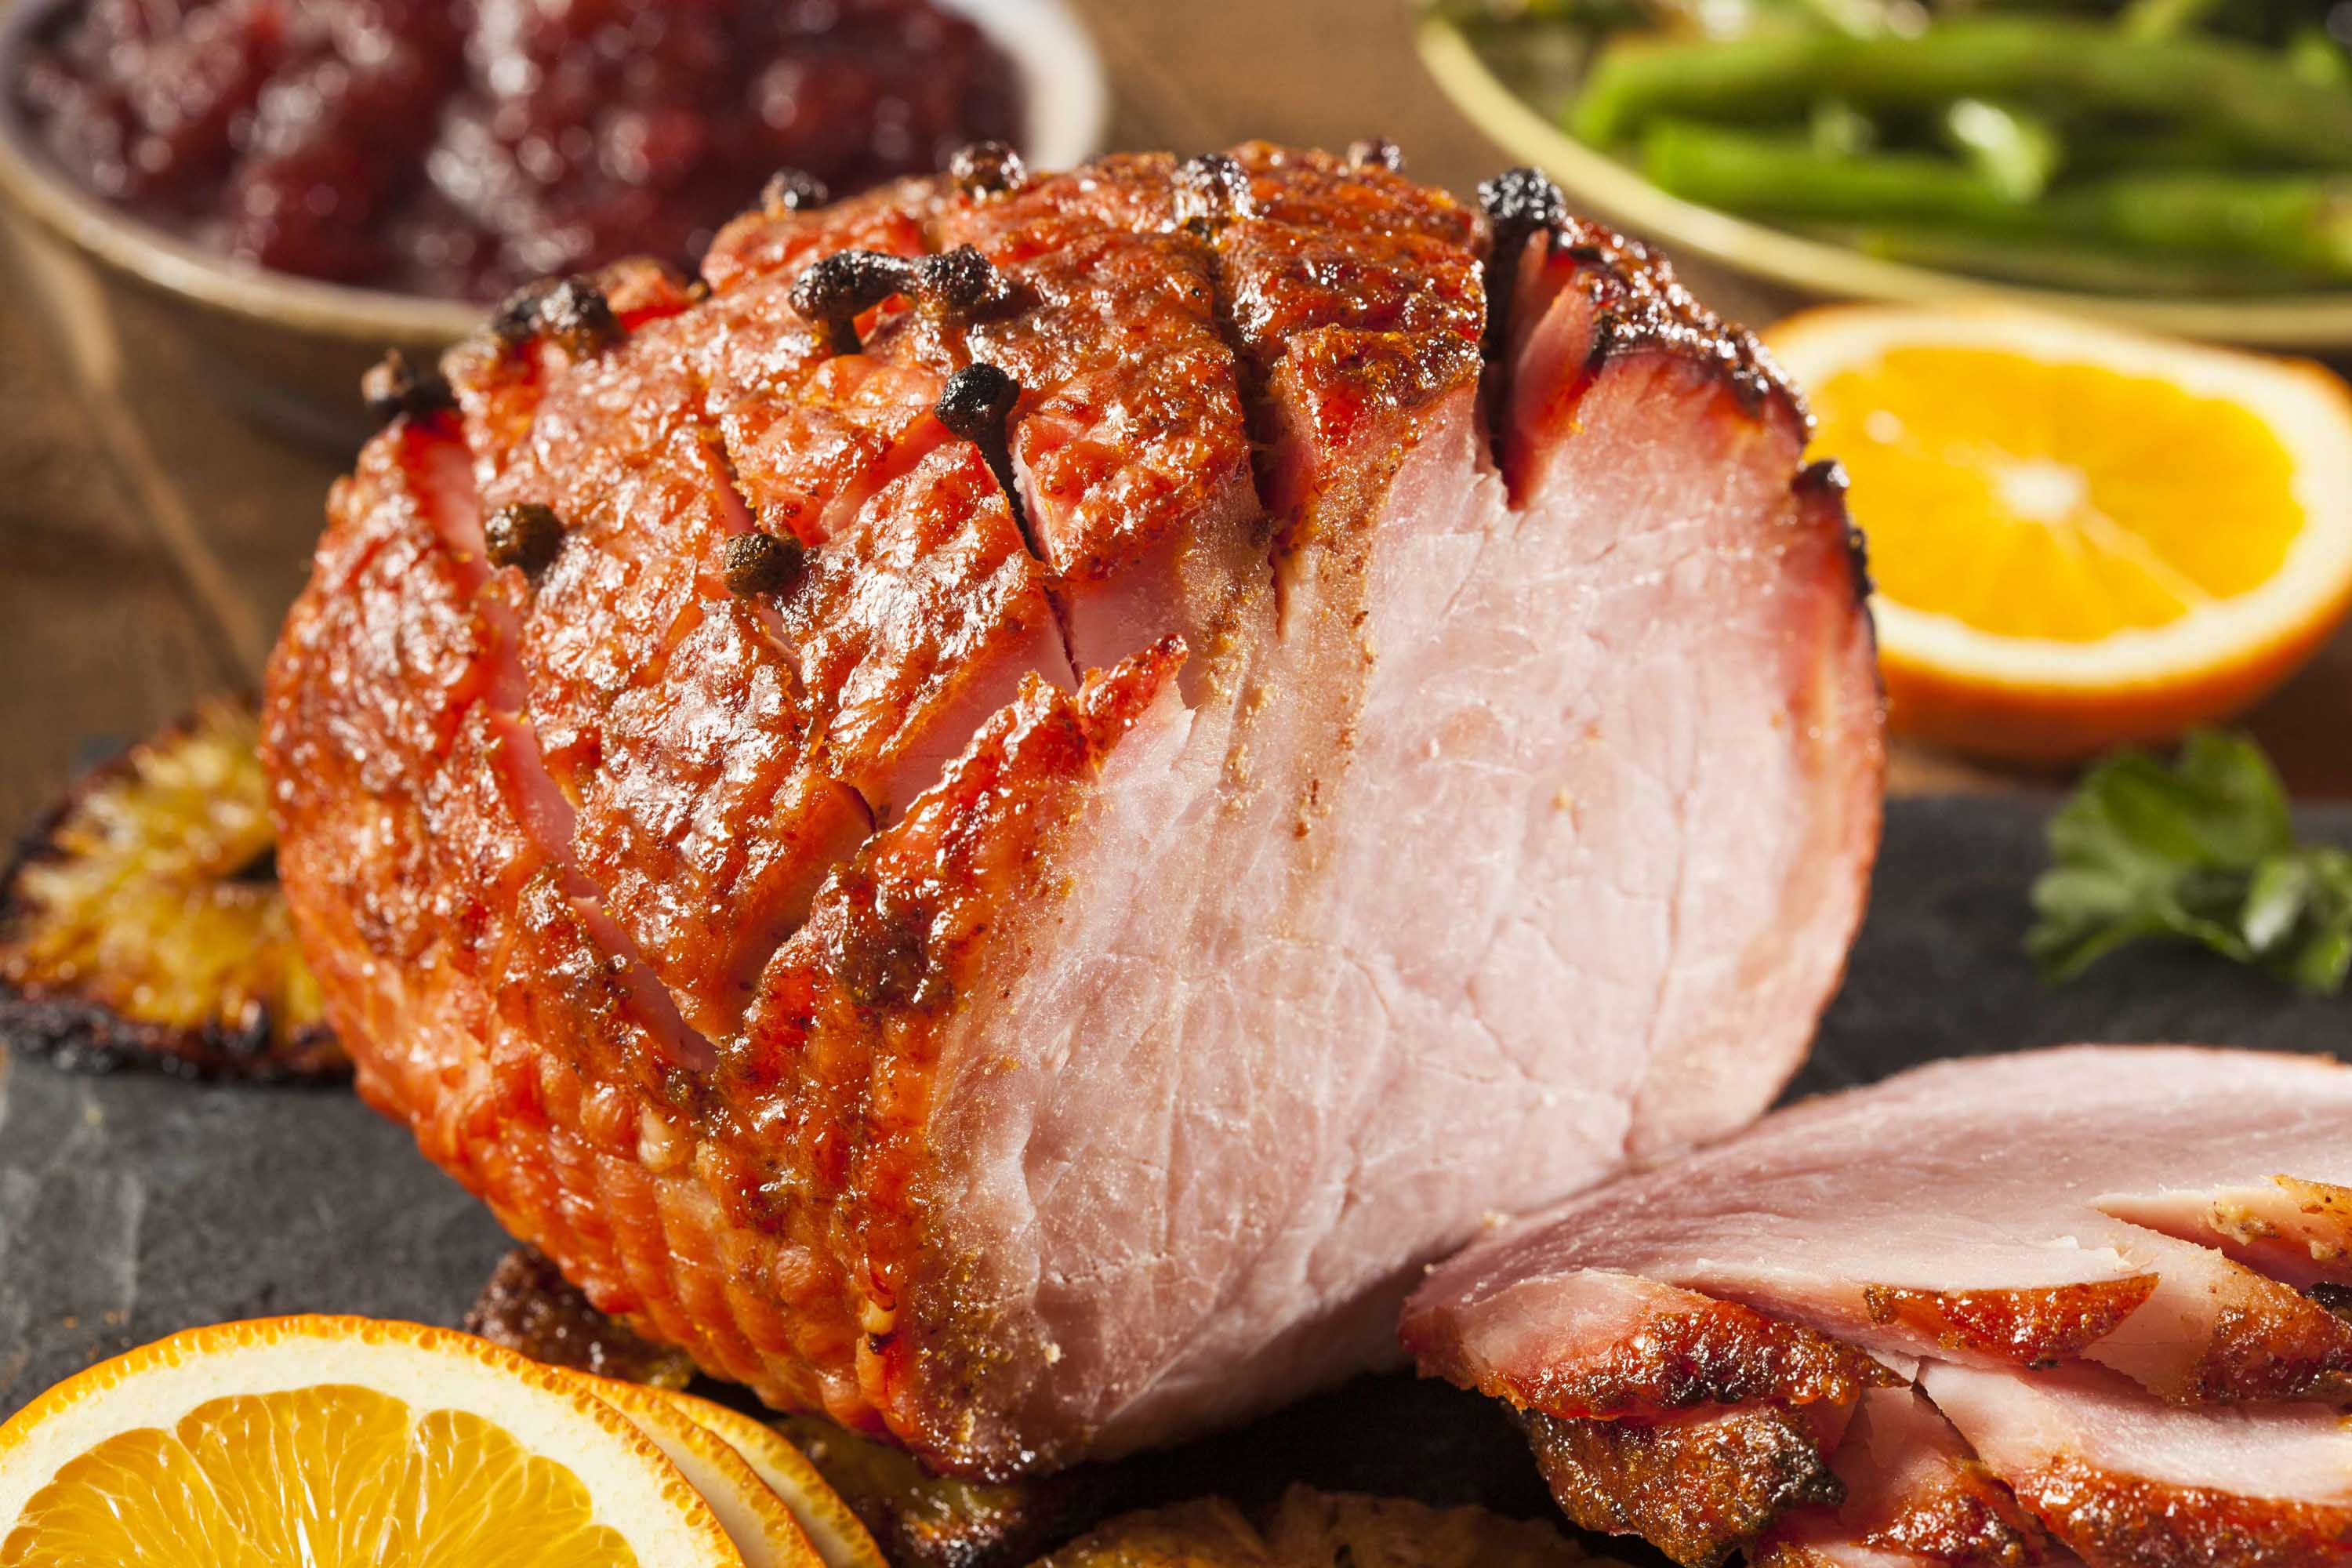 Baked Ham Recipe Perfect for Any Holiday - The Spice House